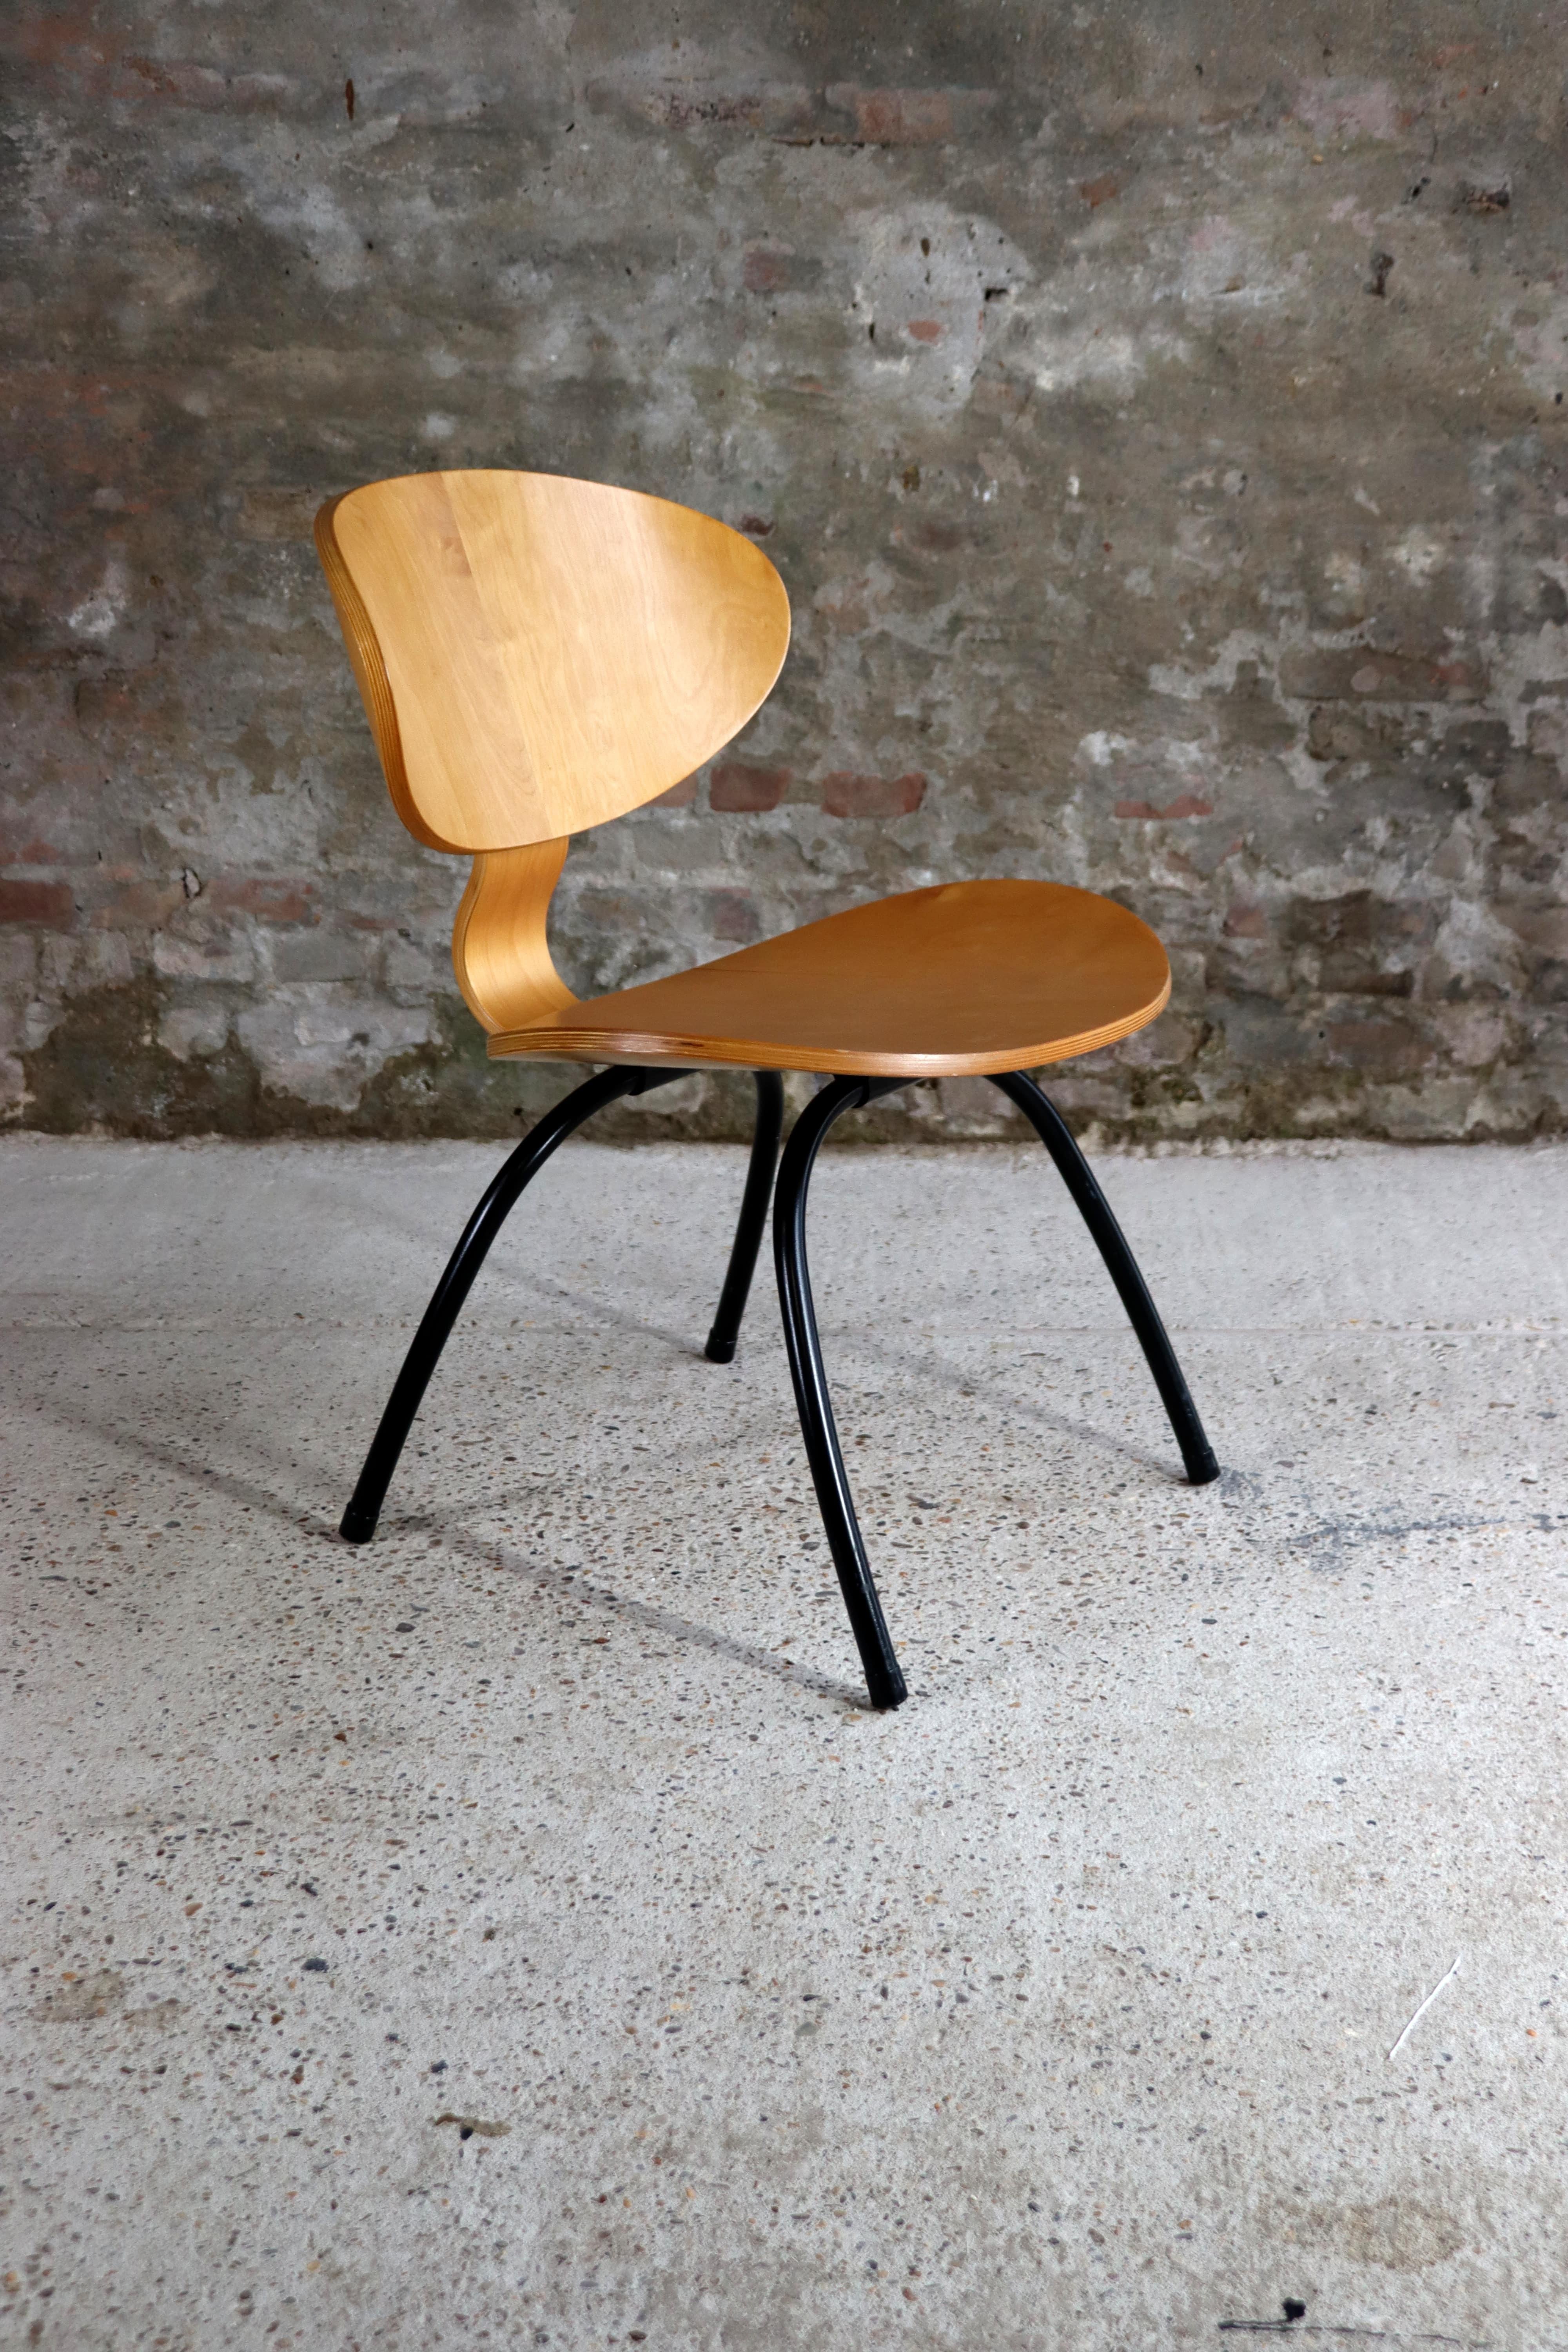 Vintage IKEA plywood armchair from the 1990s. The design is inspired by the LCW chair by Charles & Ray Eames. The seat is made of plywood and the frame is made of metal.

Condition: The chair is in a very good vintage condition.